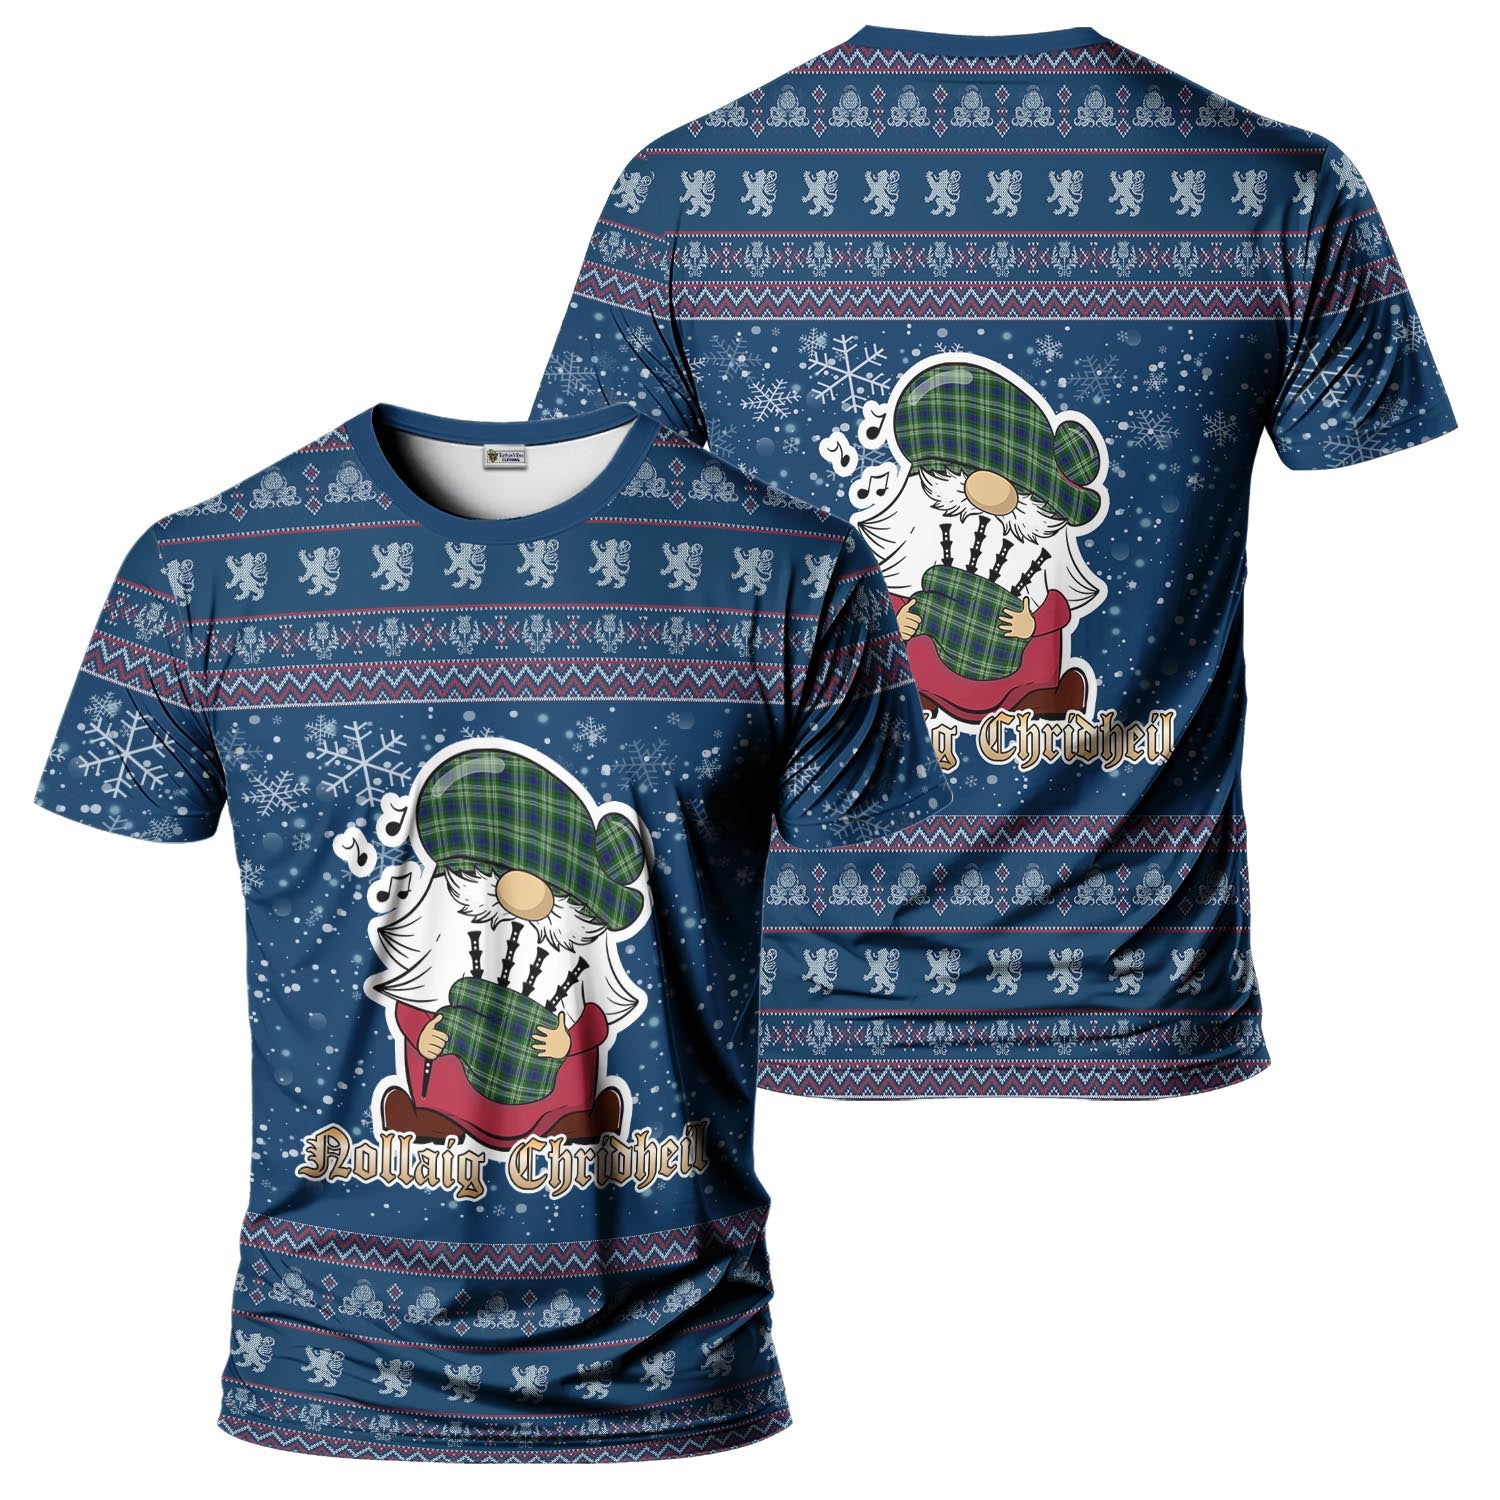 Swinton Clan Christmas Family T-Shirt with Funny Gnome Playing Bagpipes Kid's Shirt Blue - Tartanvibesclothing